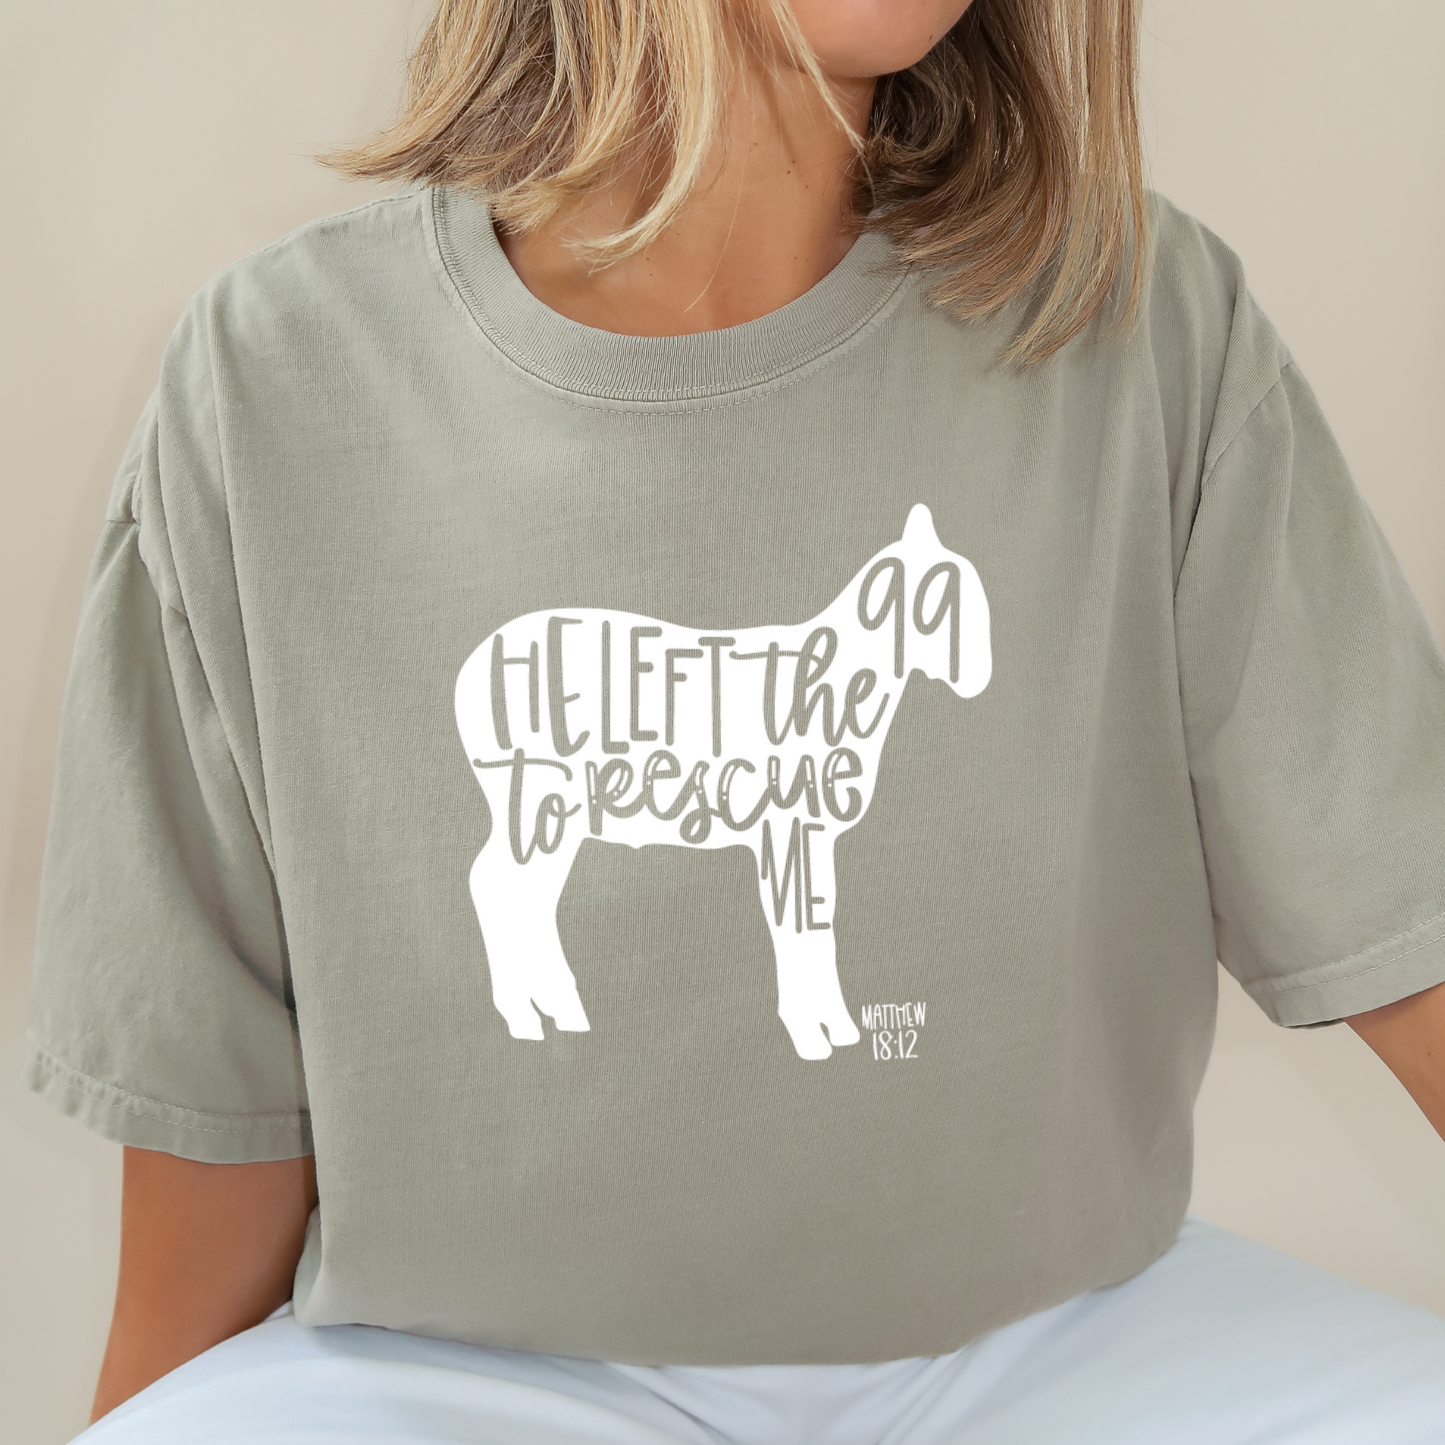 He Left The 99 | Comfort Colors Ring-Spun Cotton | He Found Me | Christian Bible Verse Tee